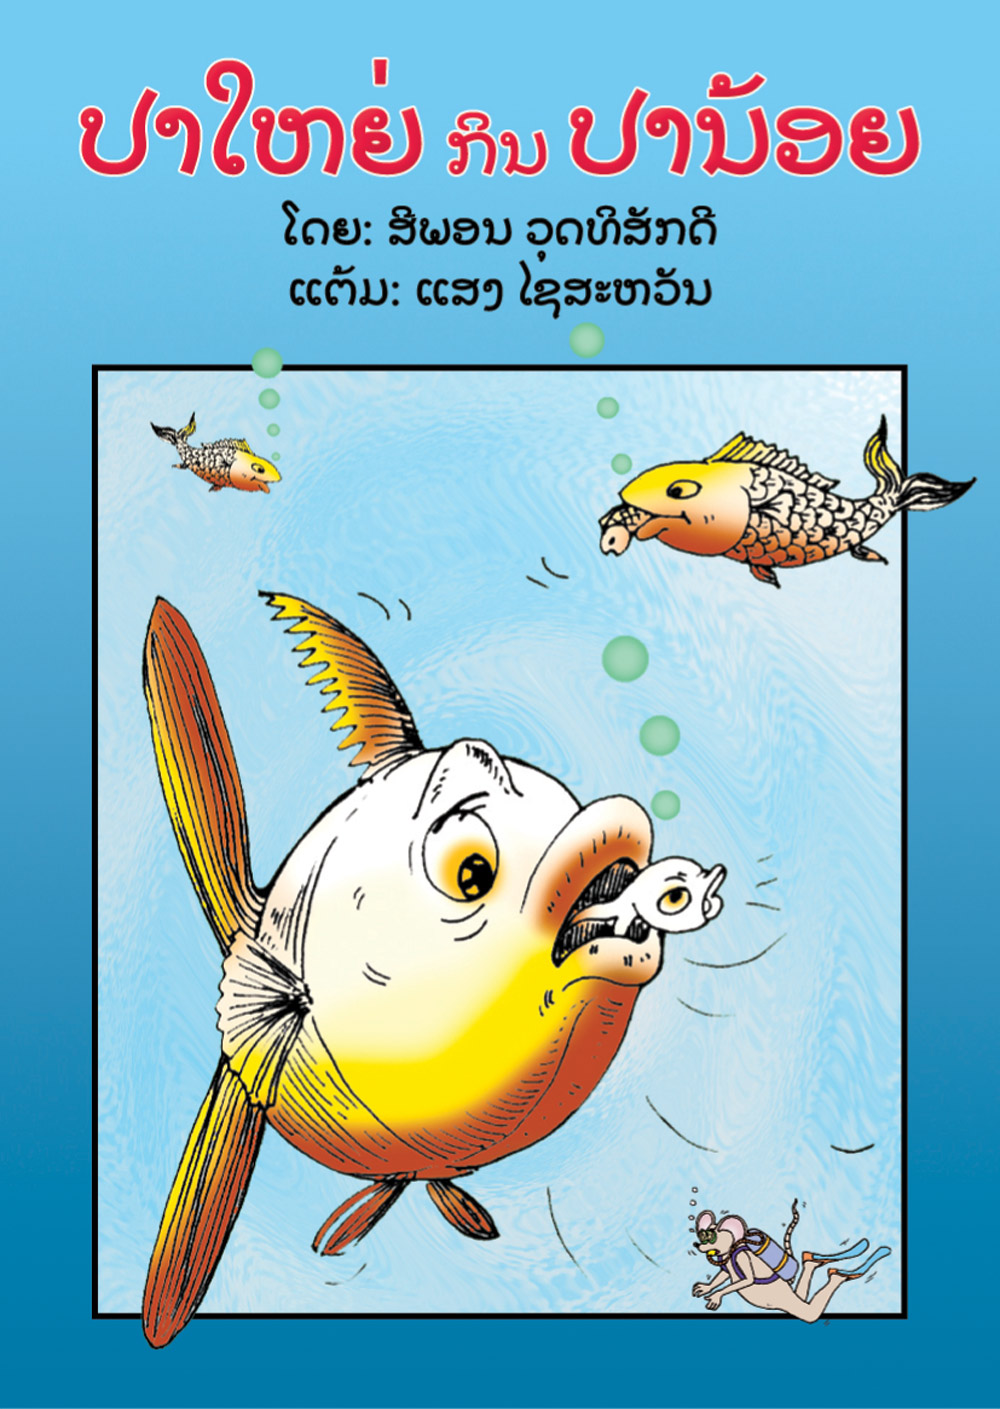 Big Fish Eat Small Fish large book cover, published in Lao language